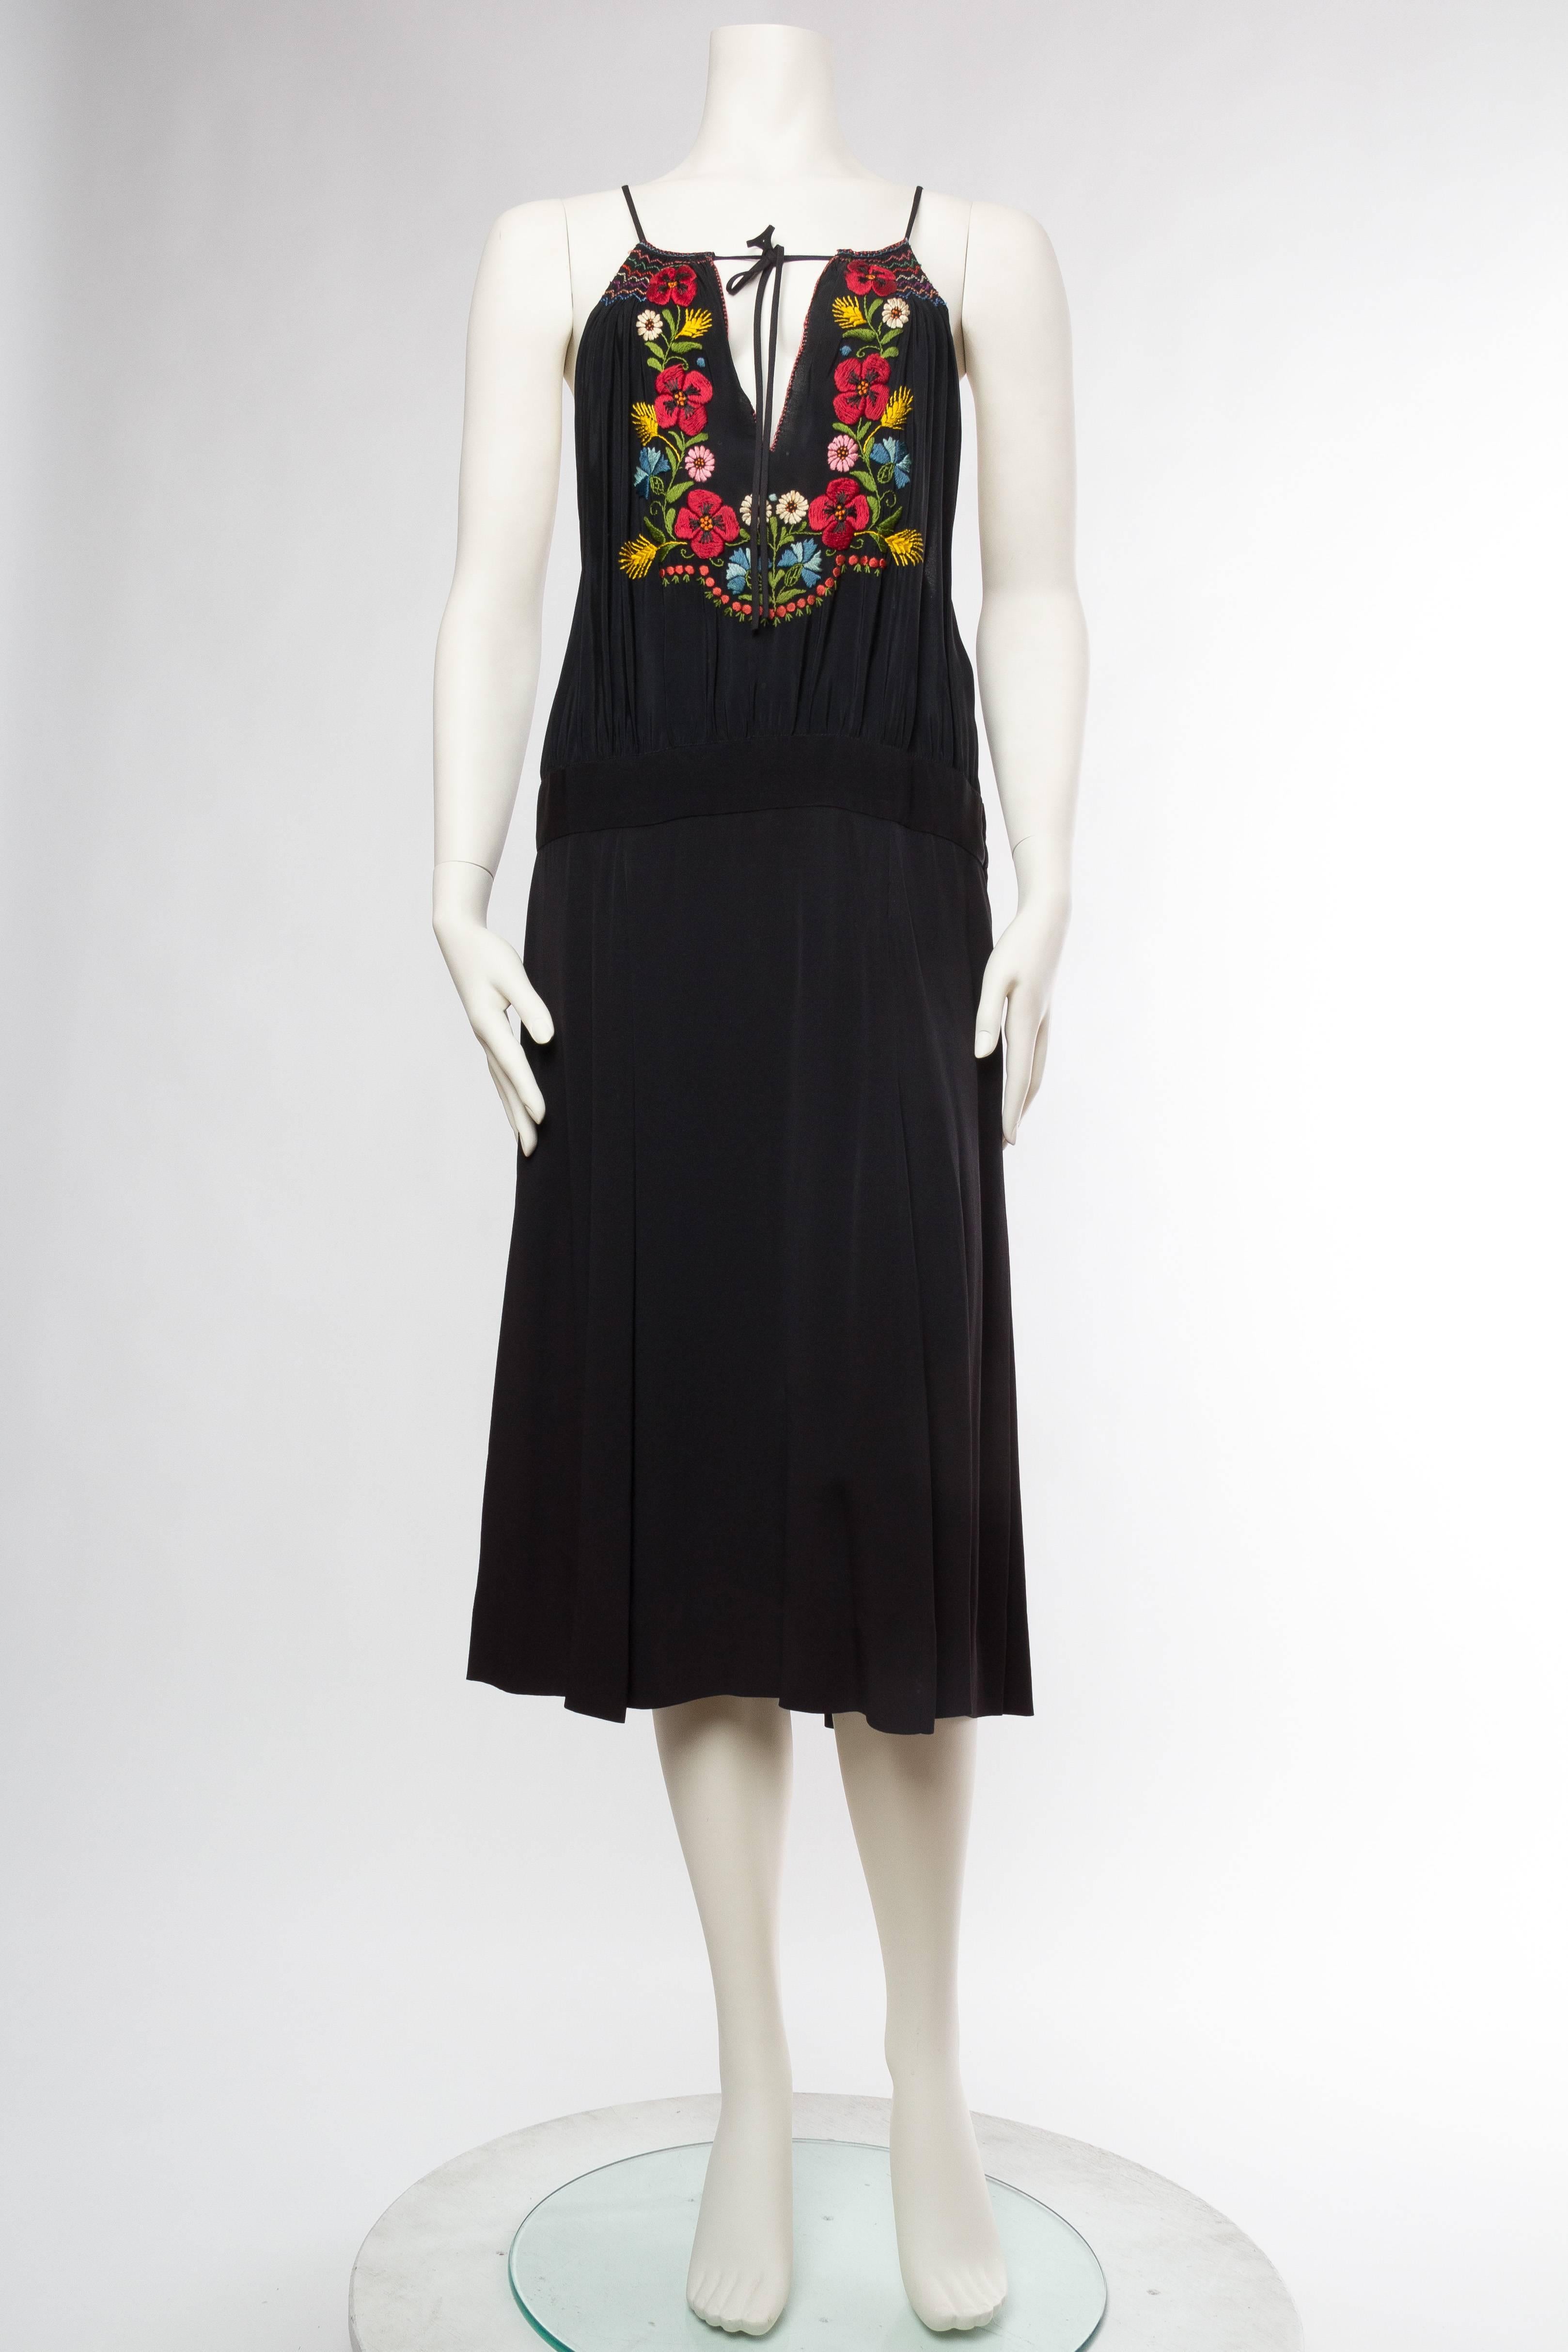 MORPHEW COLLECTION Black Rayon Bohemian Embroidered Dress With Flowers & Hand Smocking
MORPHEW COLLECTION is made entirely by hand in our NYC Ateliér of rare antique materials sourced from around the globe. Our sustainable vintage materials